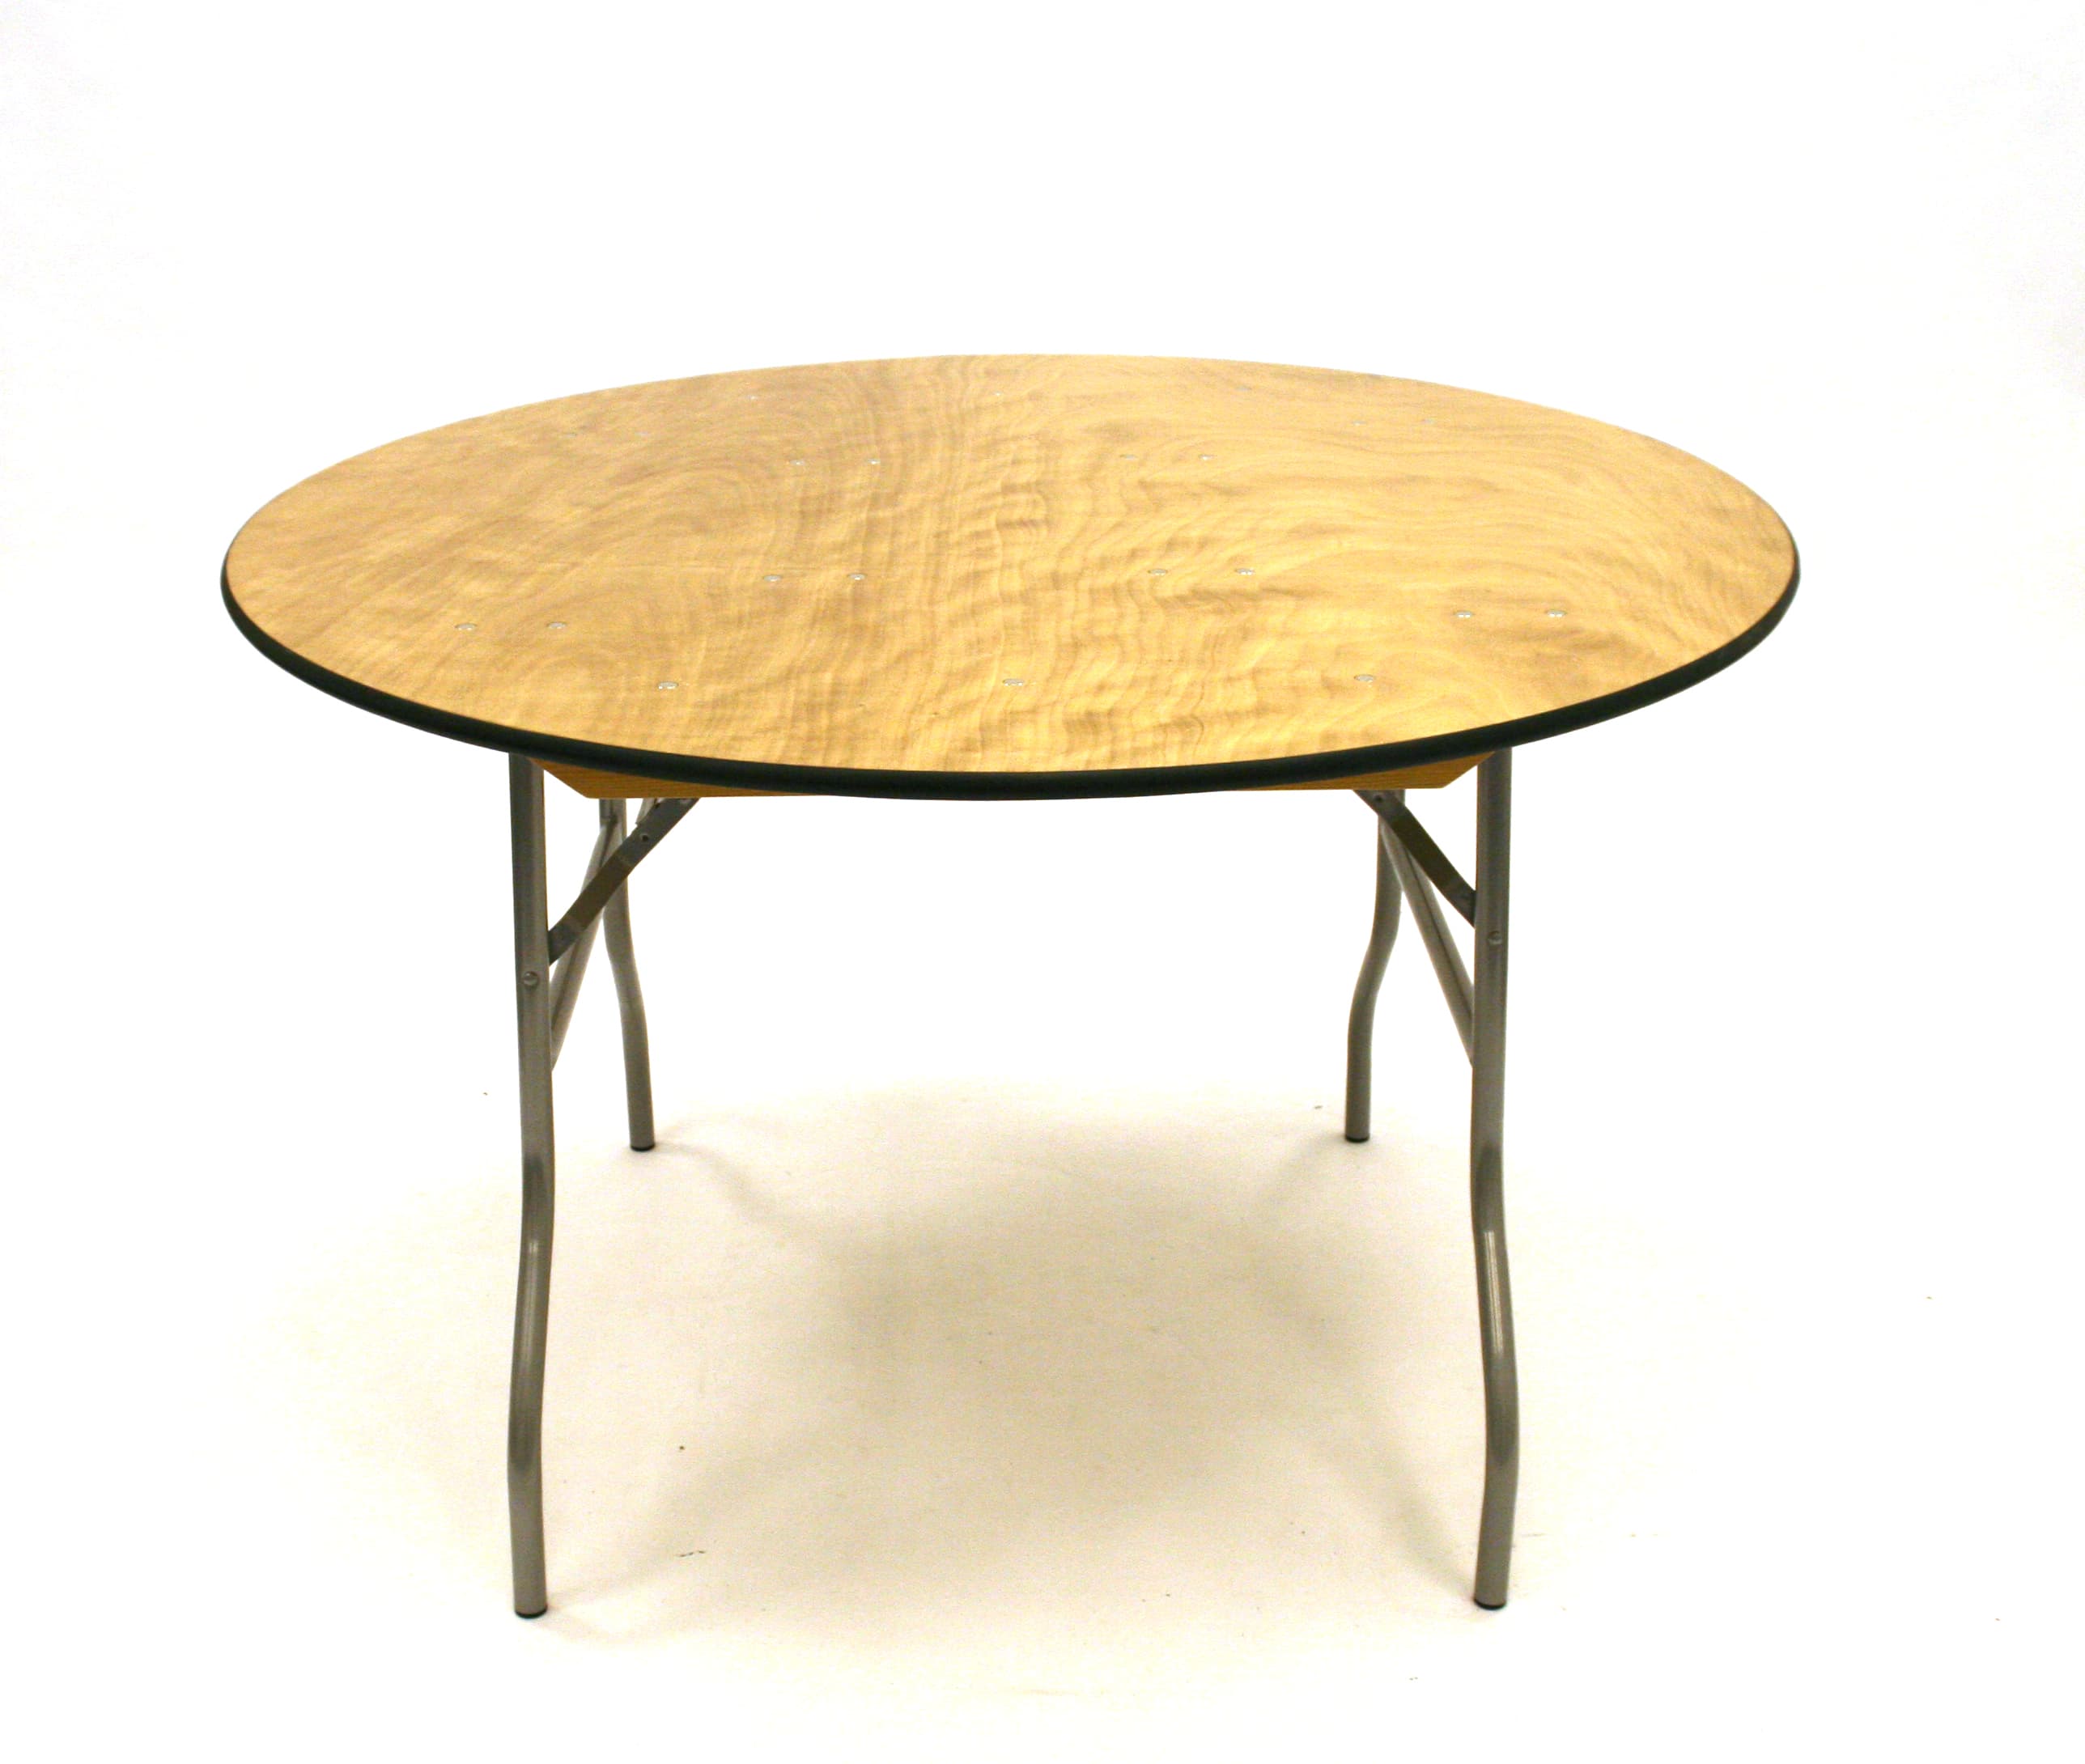 6 Foot Round Table Hire Weddings, 6 Feet Round Tables